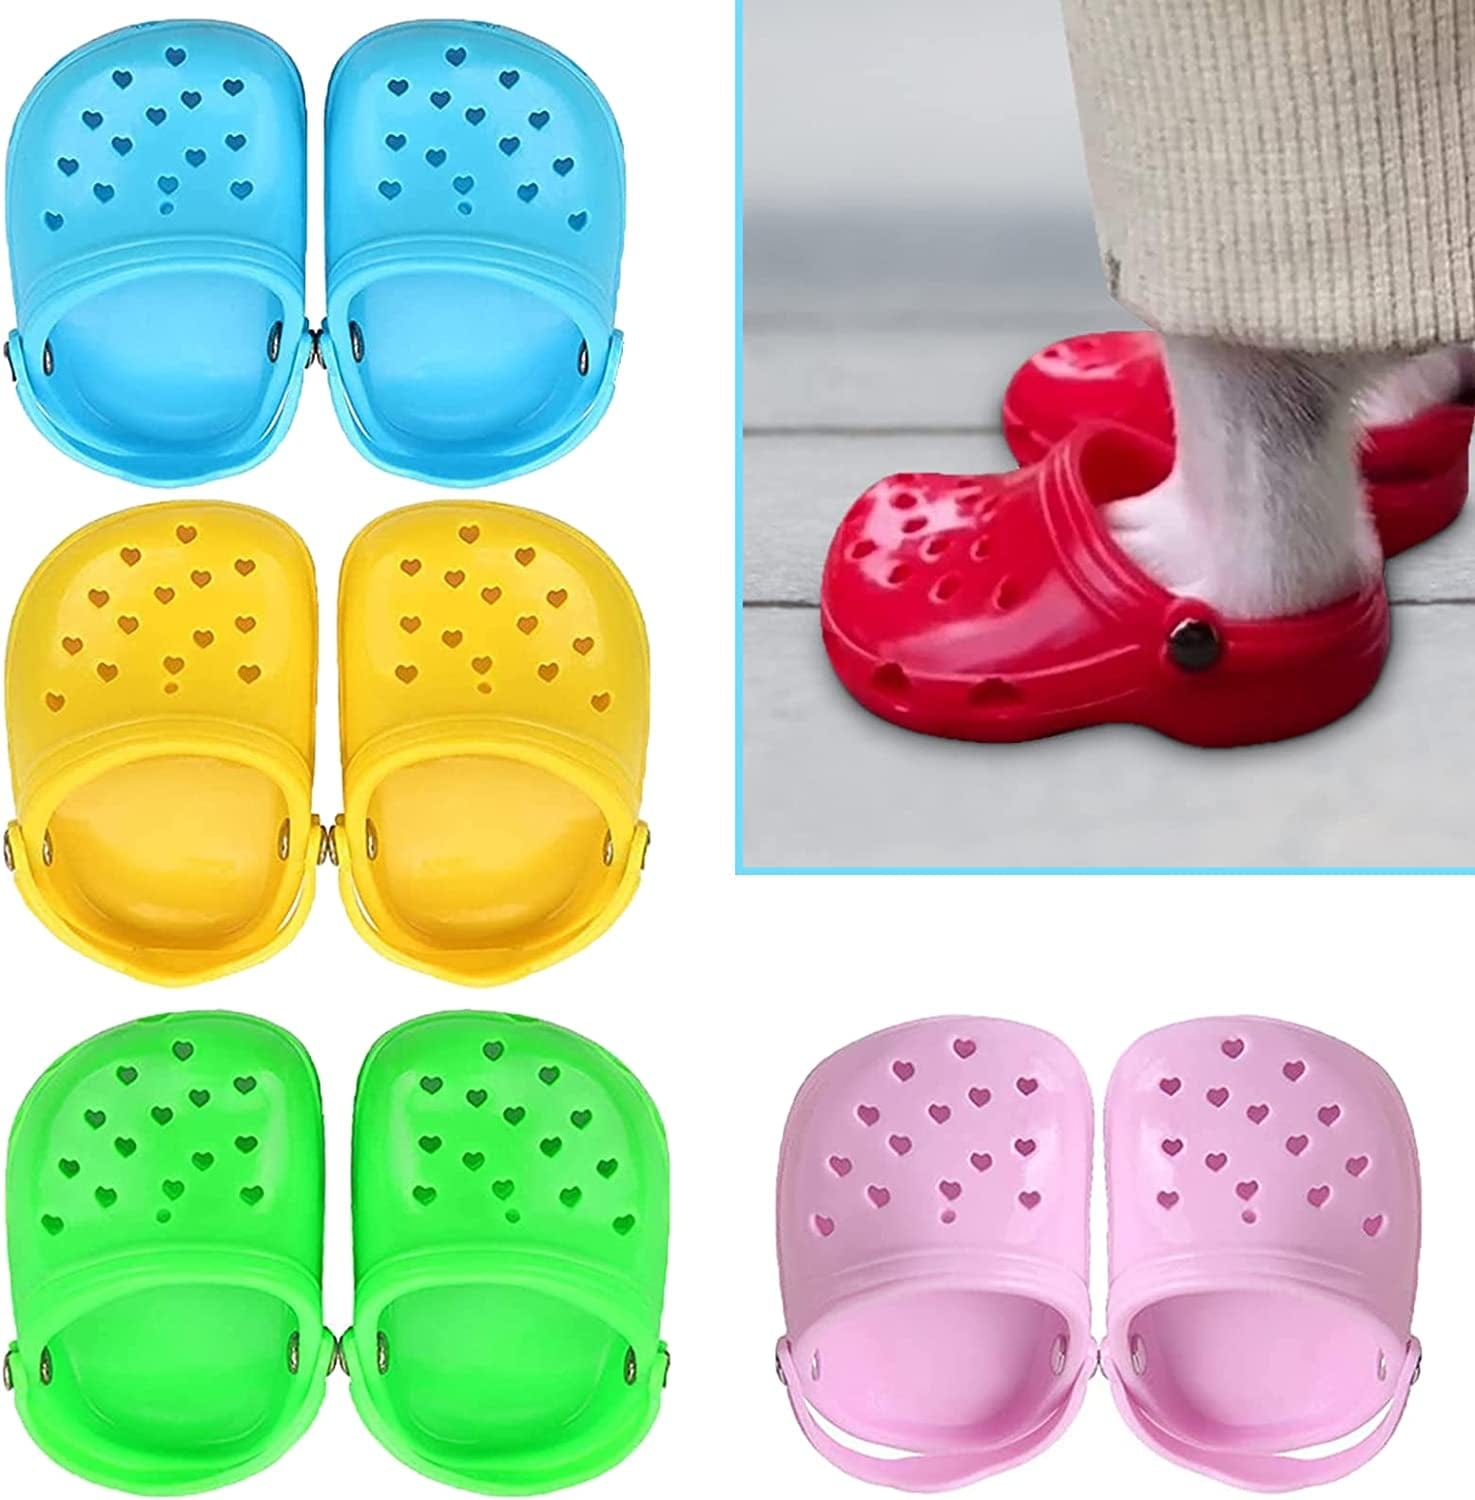 Pet Dog Croc,Summer Puppy Shoes,Candy Colors Sandals with Rugged Anti-Slip Sole, Breathable Comfortable Dog Shoes Gift for Pet Festival